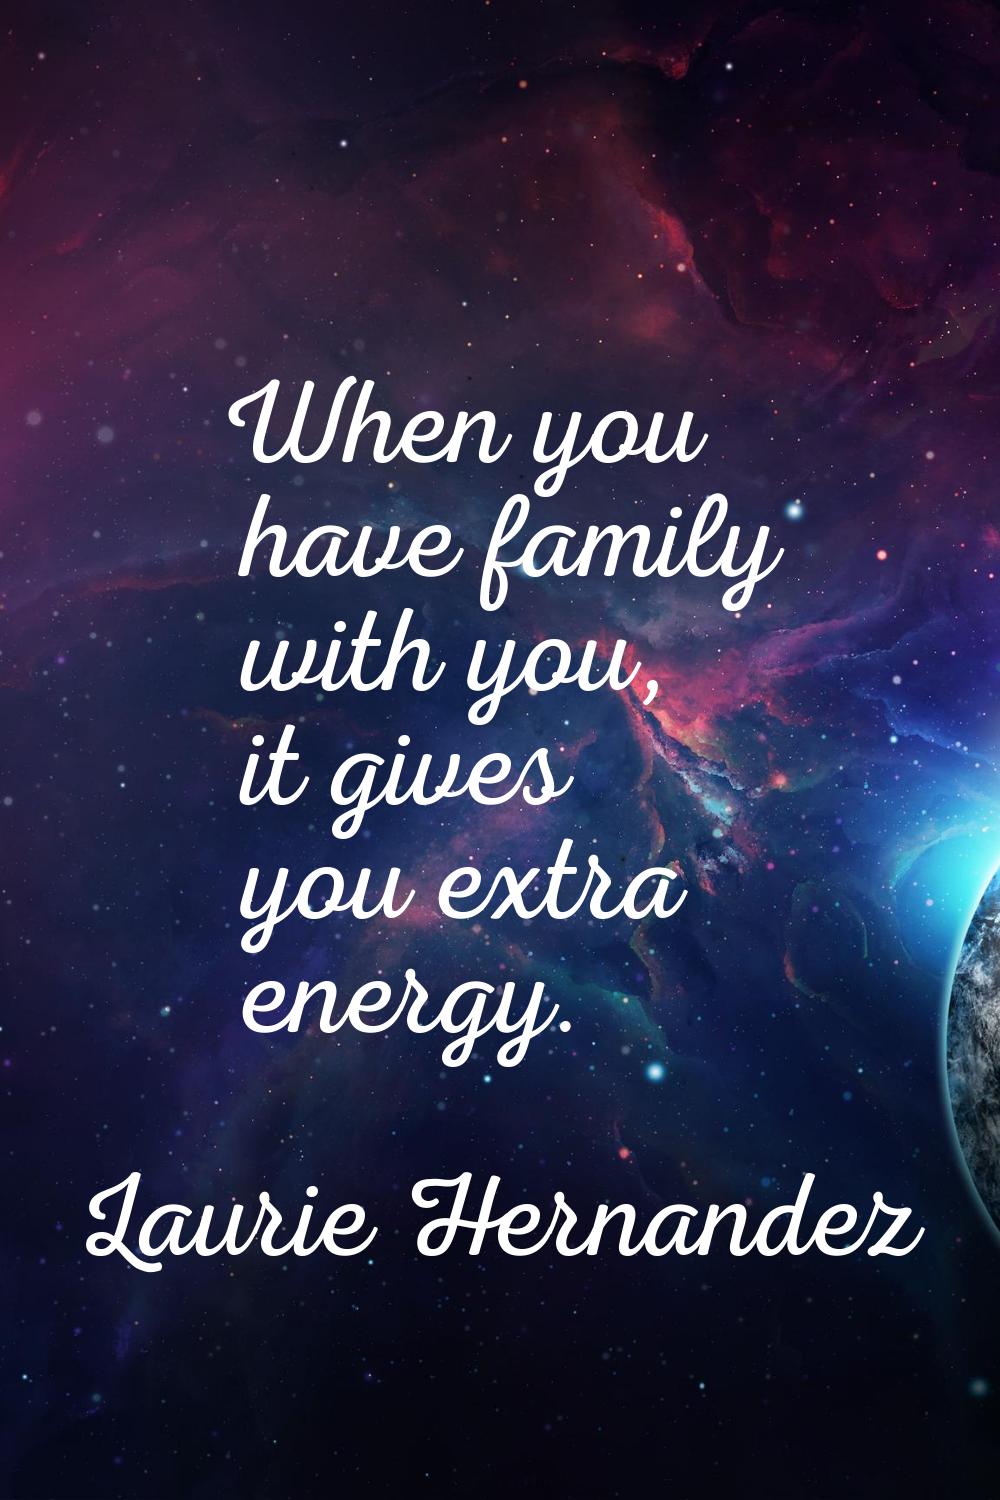 When you have family with you, it gives you extra energy.